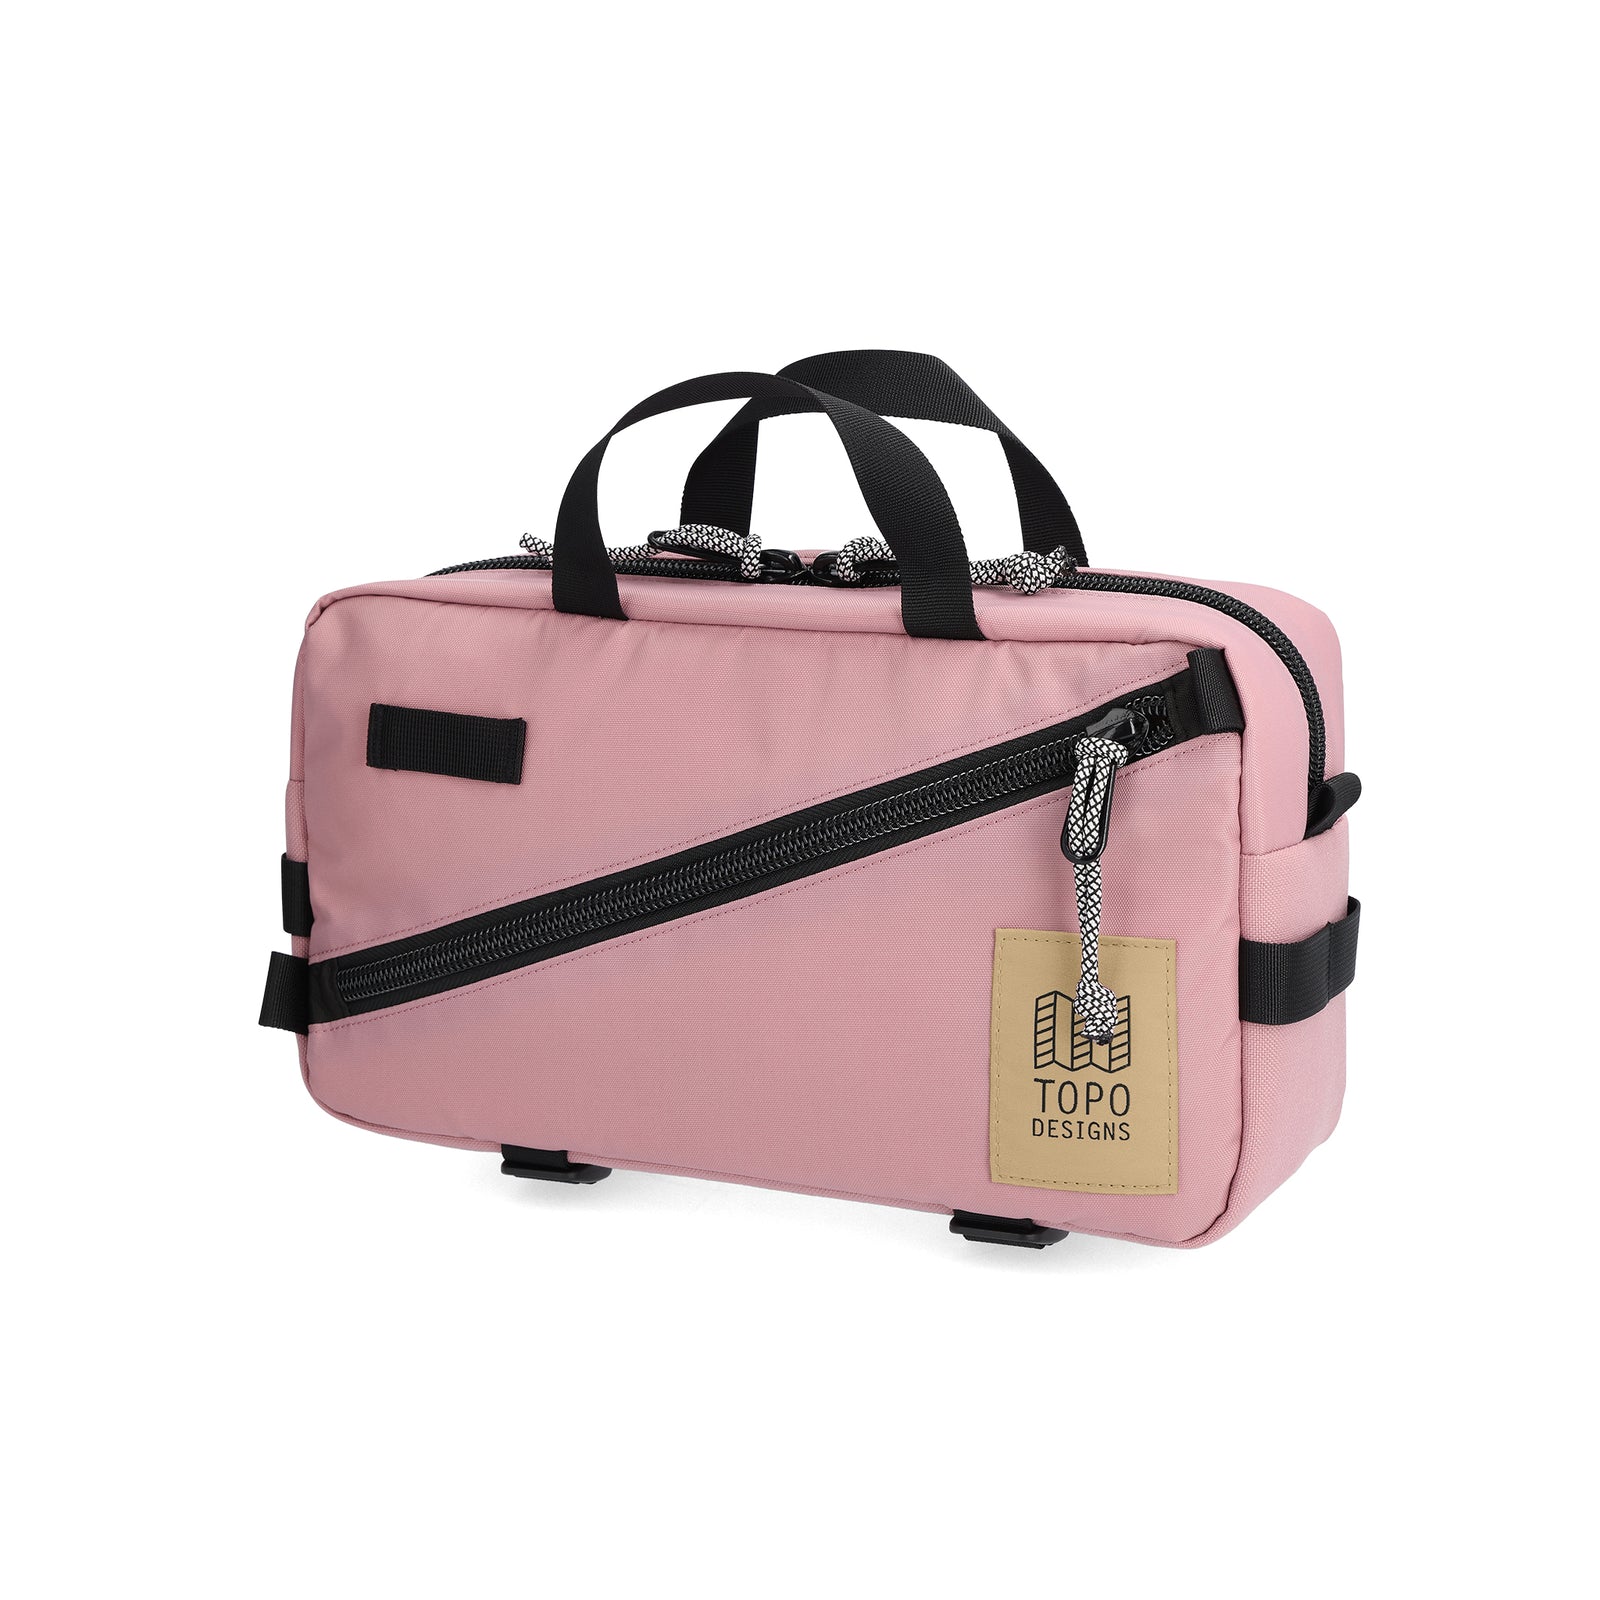 Front View of Topo Designs Quick Pack  in "Rose"